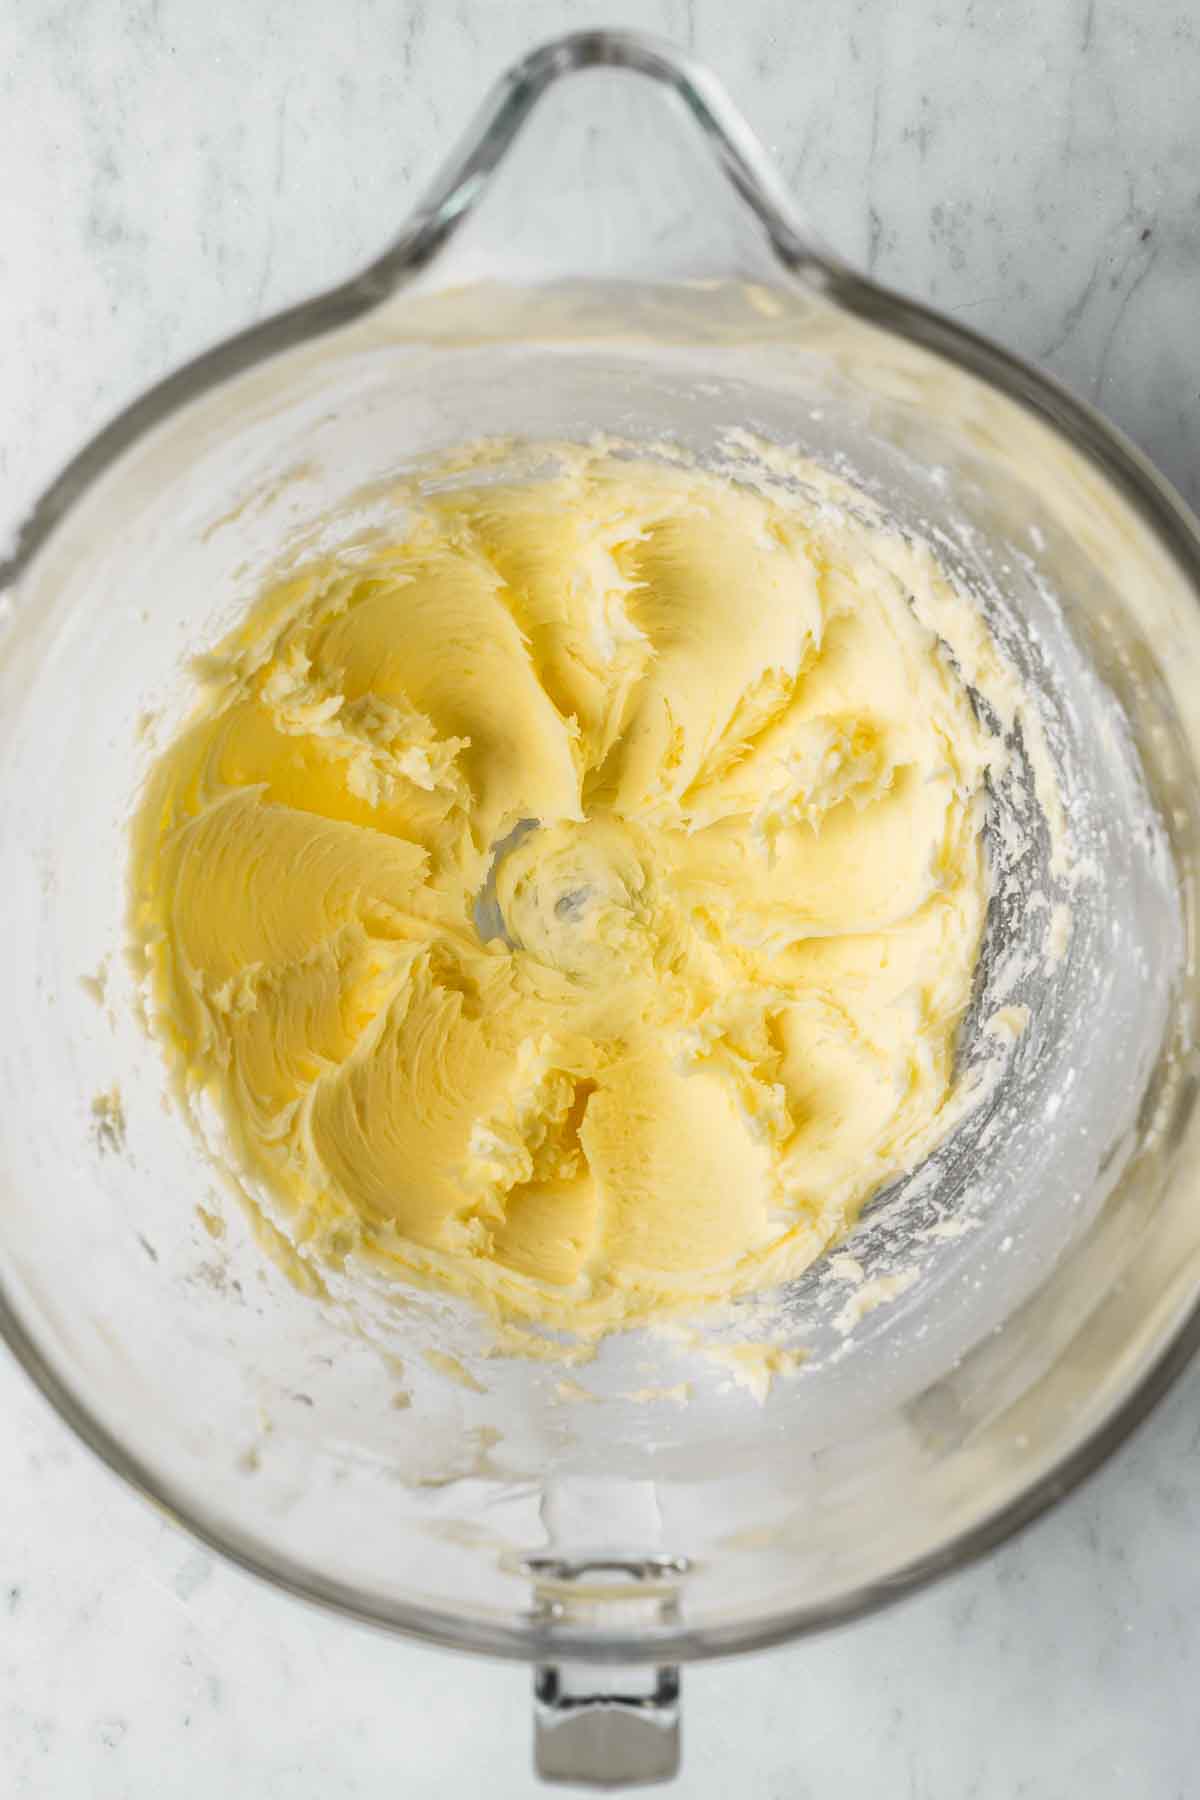 Creamed butter in a clear glass mixing bowl.